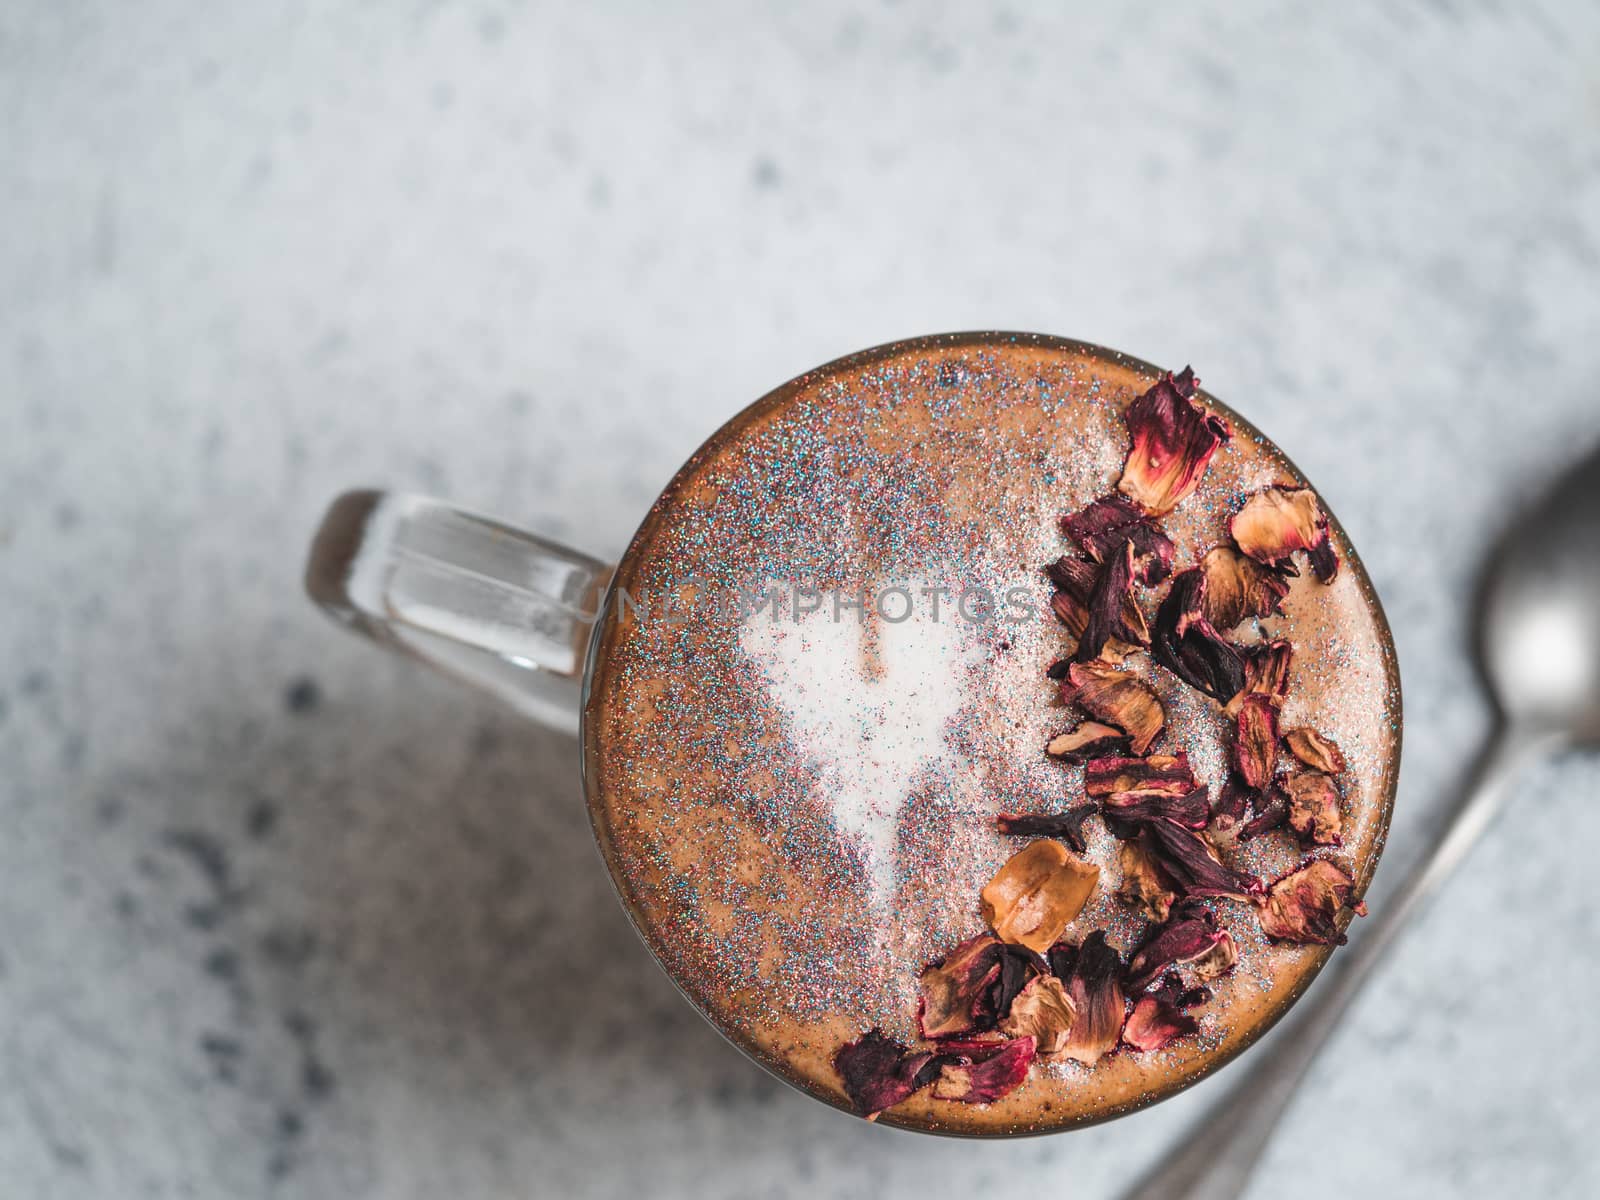 Trendy Coffee with edible glitter and dried rose petals. Cup of sparkly coffee or diamond cappuccino on gray table. Copy space for text. Top view or flat lay.